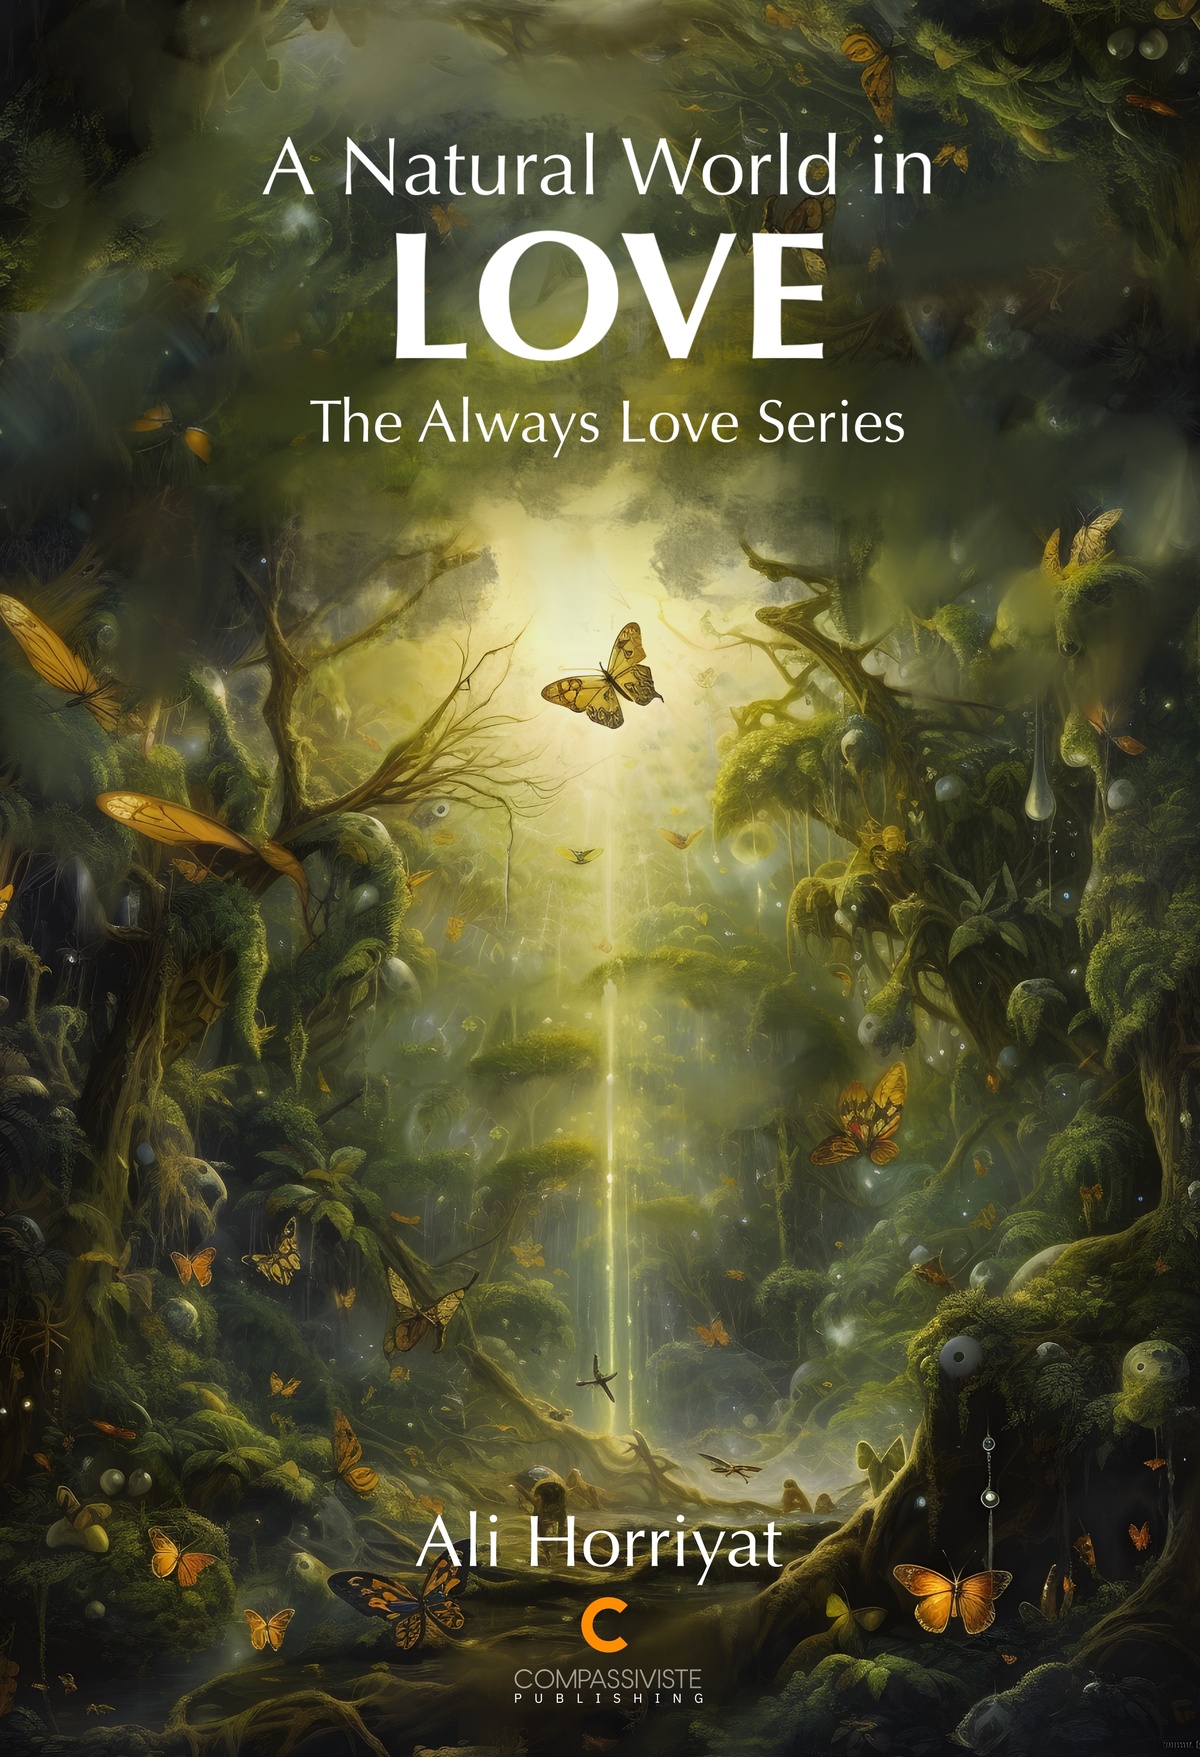 Book cover of A Natural World in Love by Ali Horriyat